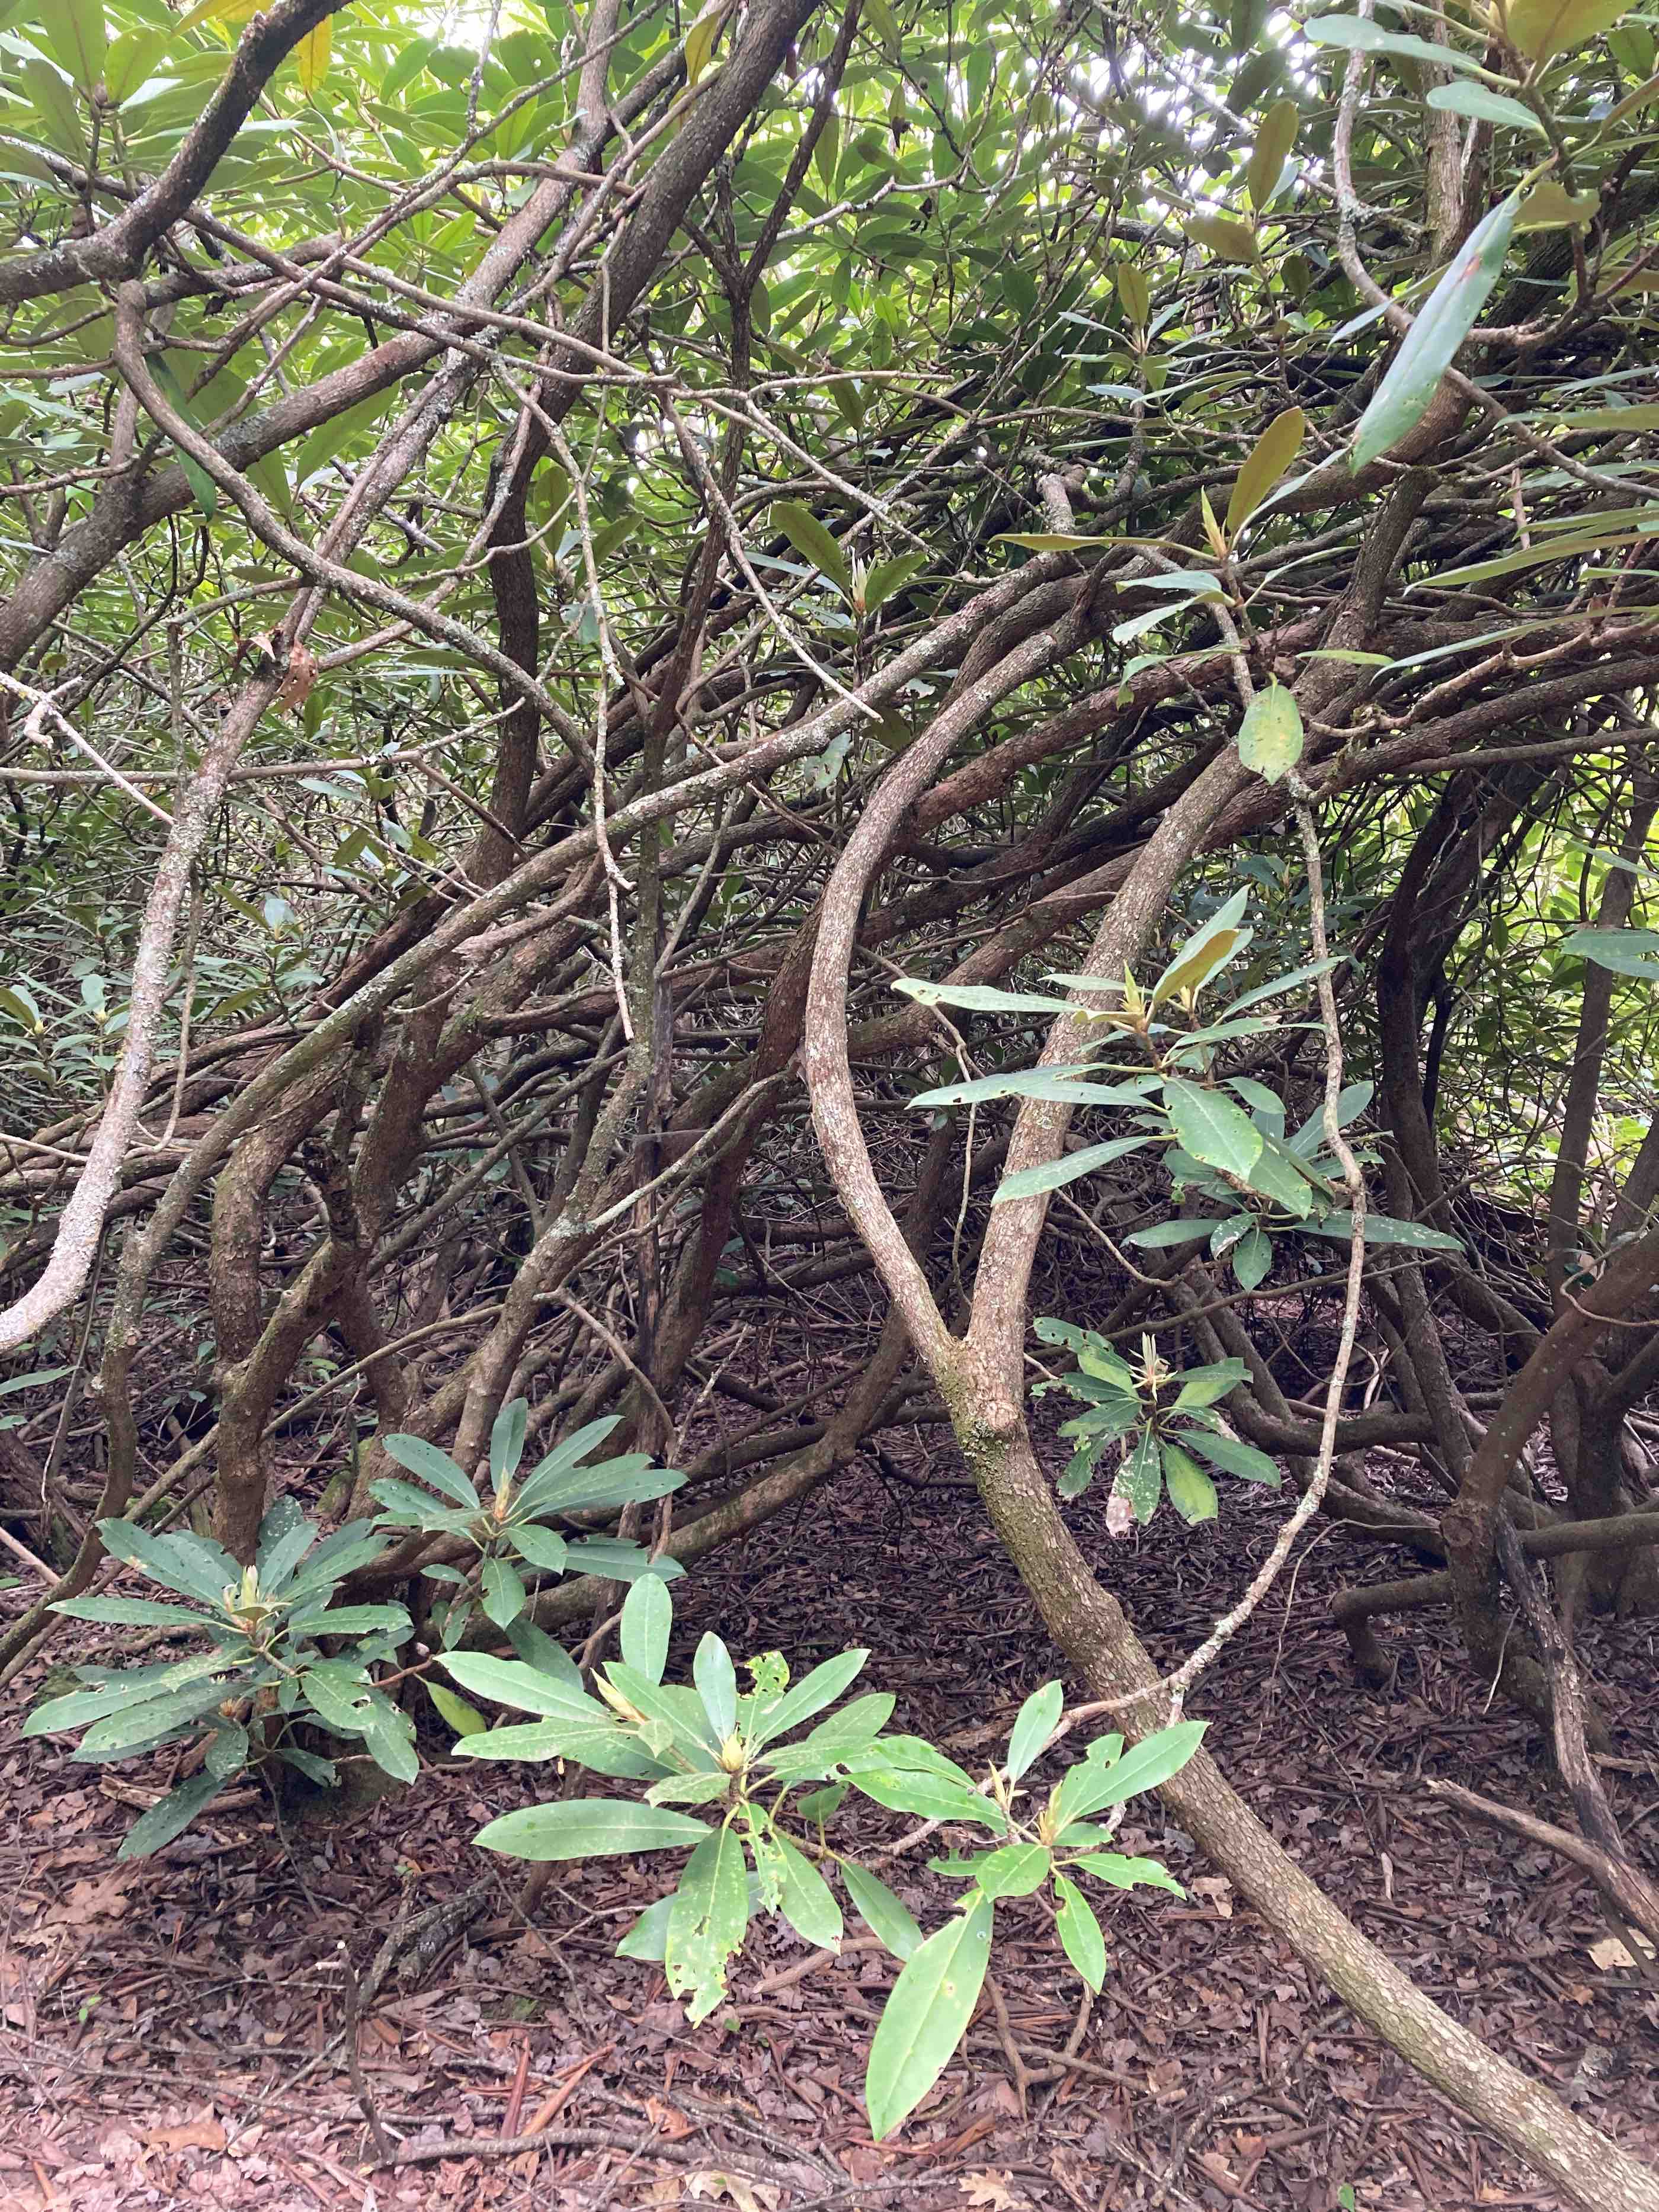 The Scientific Name is Rhododendron maximum. You will likely hear them called Great Rhododendron, Rosebay Rhododendron. This picture shows the Can form very dense, almost impenetrable stands of Rhododendron maximum